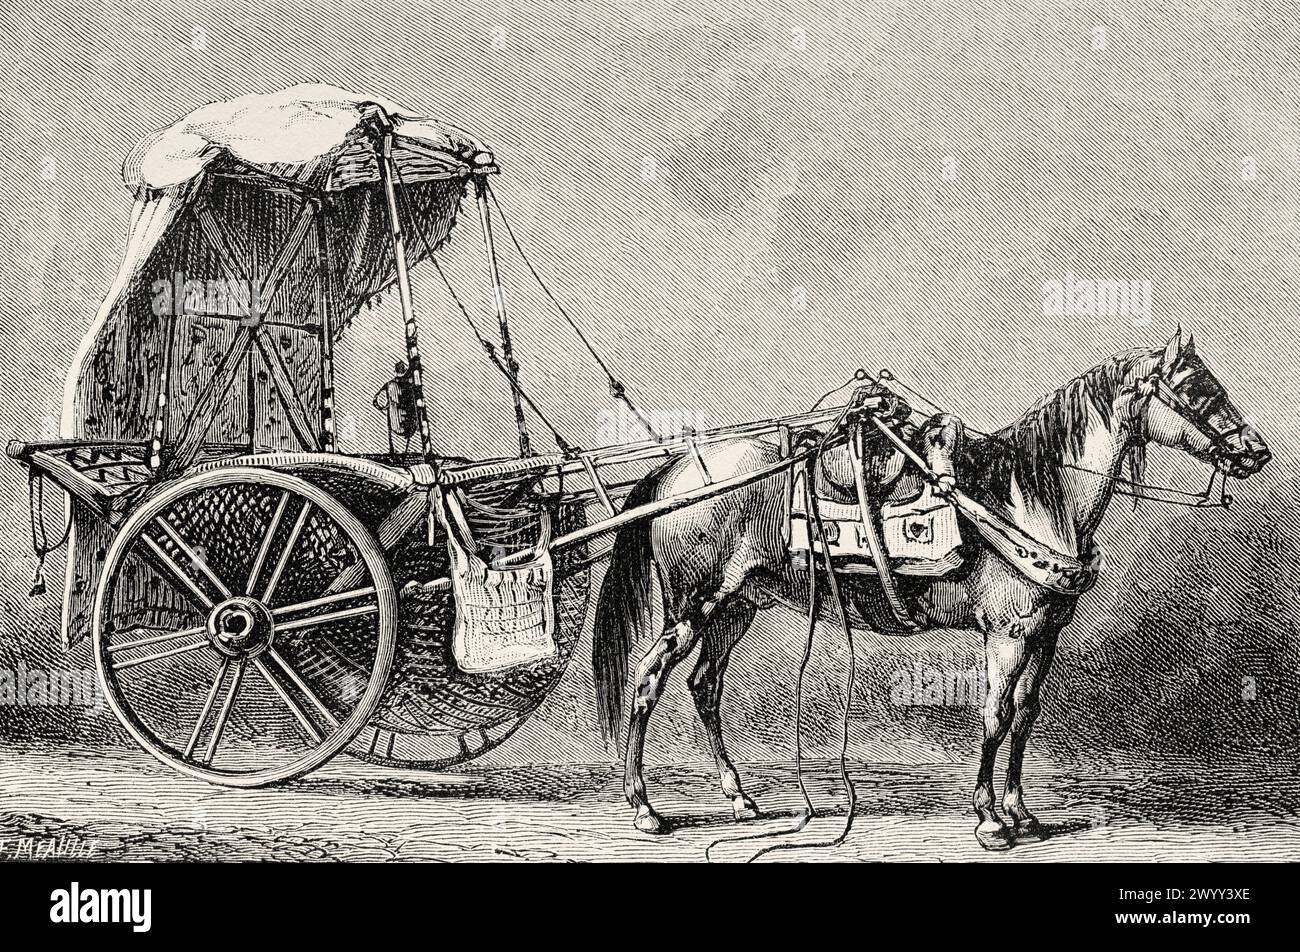 Traditional Hindu Carriage pulled by a horse typical from Punjab, Pakistan. Asia. Journey to Murree (Northern Himalayas) 1878. Drawings and texts by Evremond de Berard (1824 – 1881) Le Tour du Monde 1880 Stock Photo